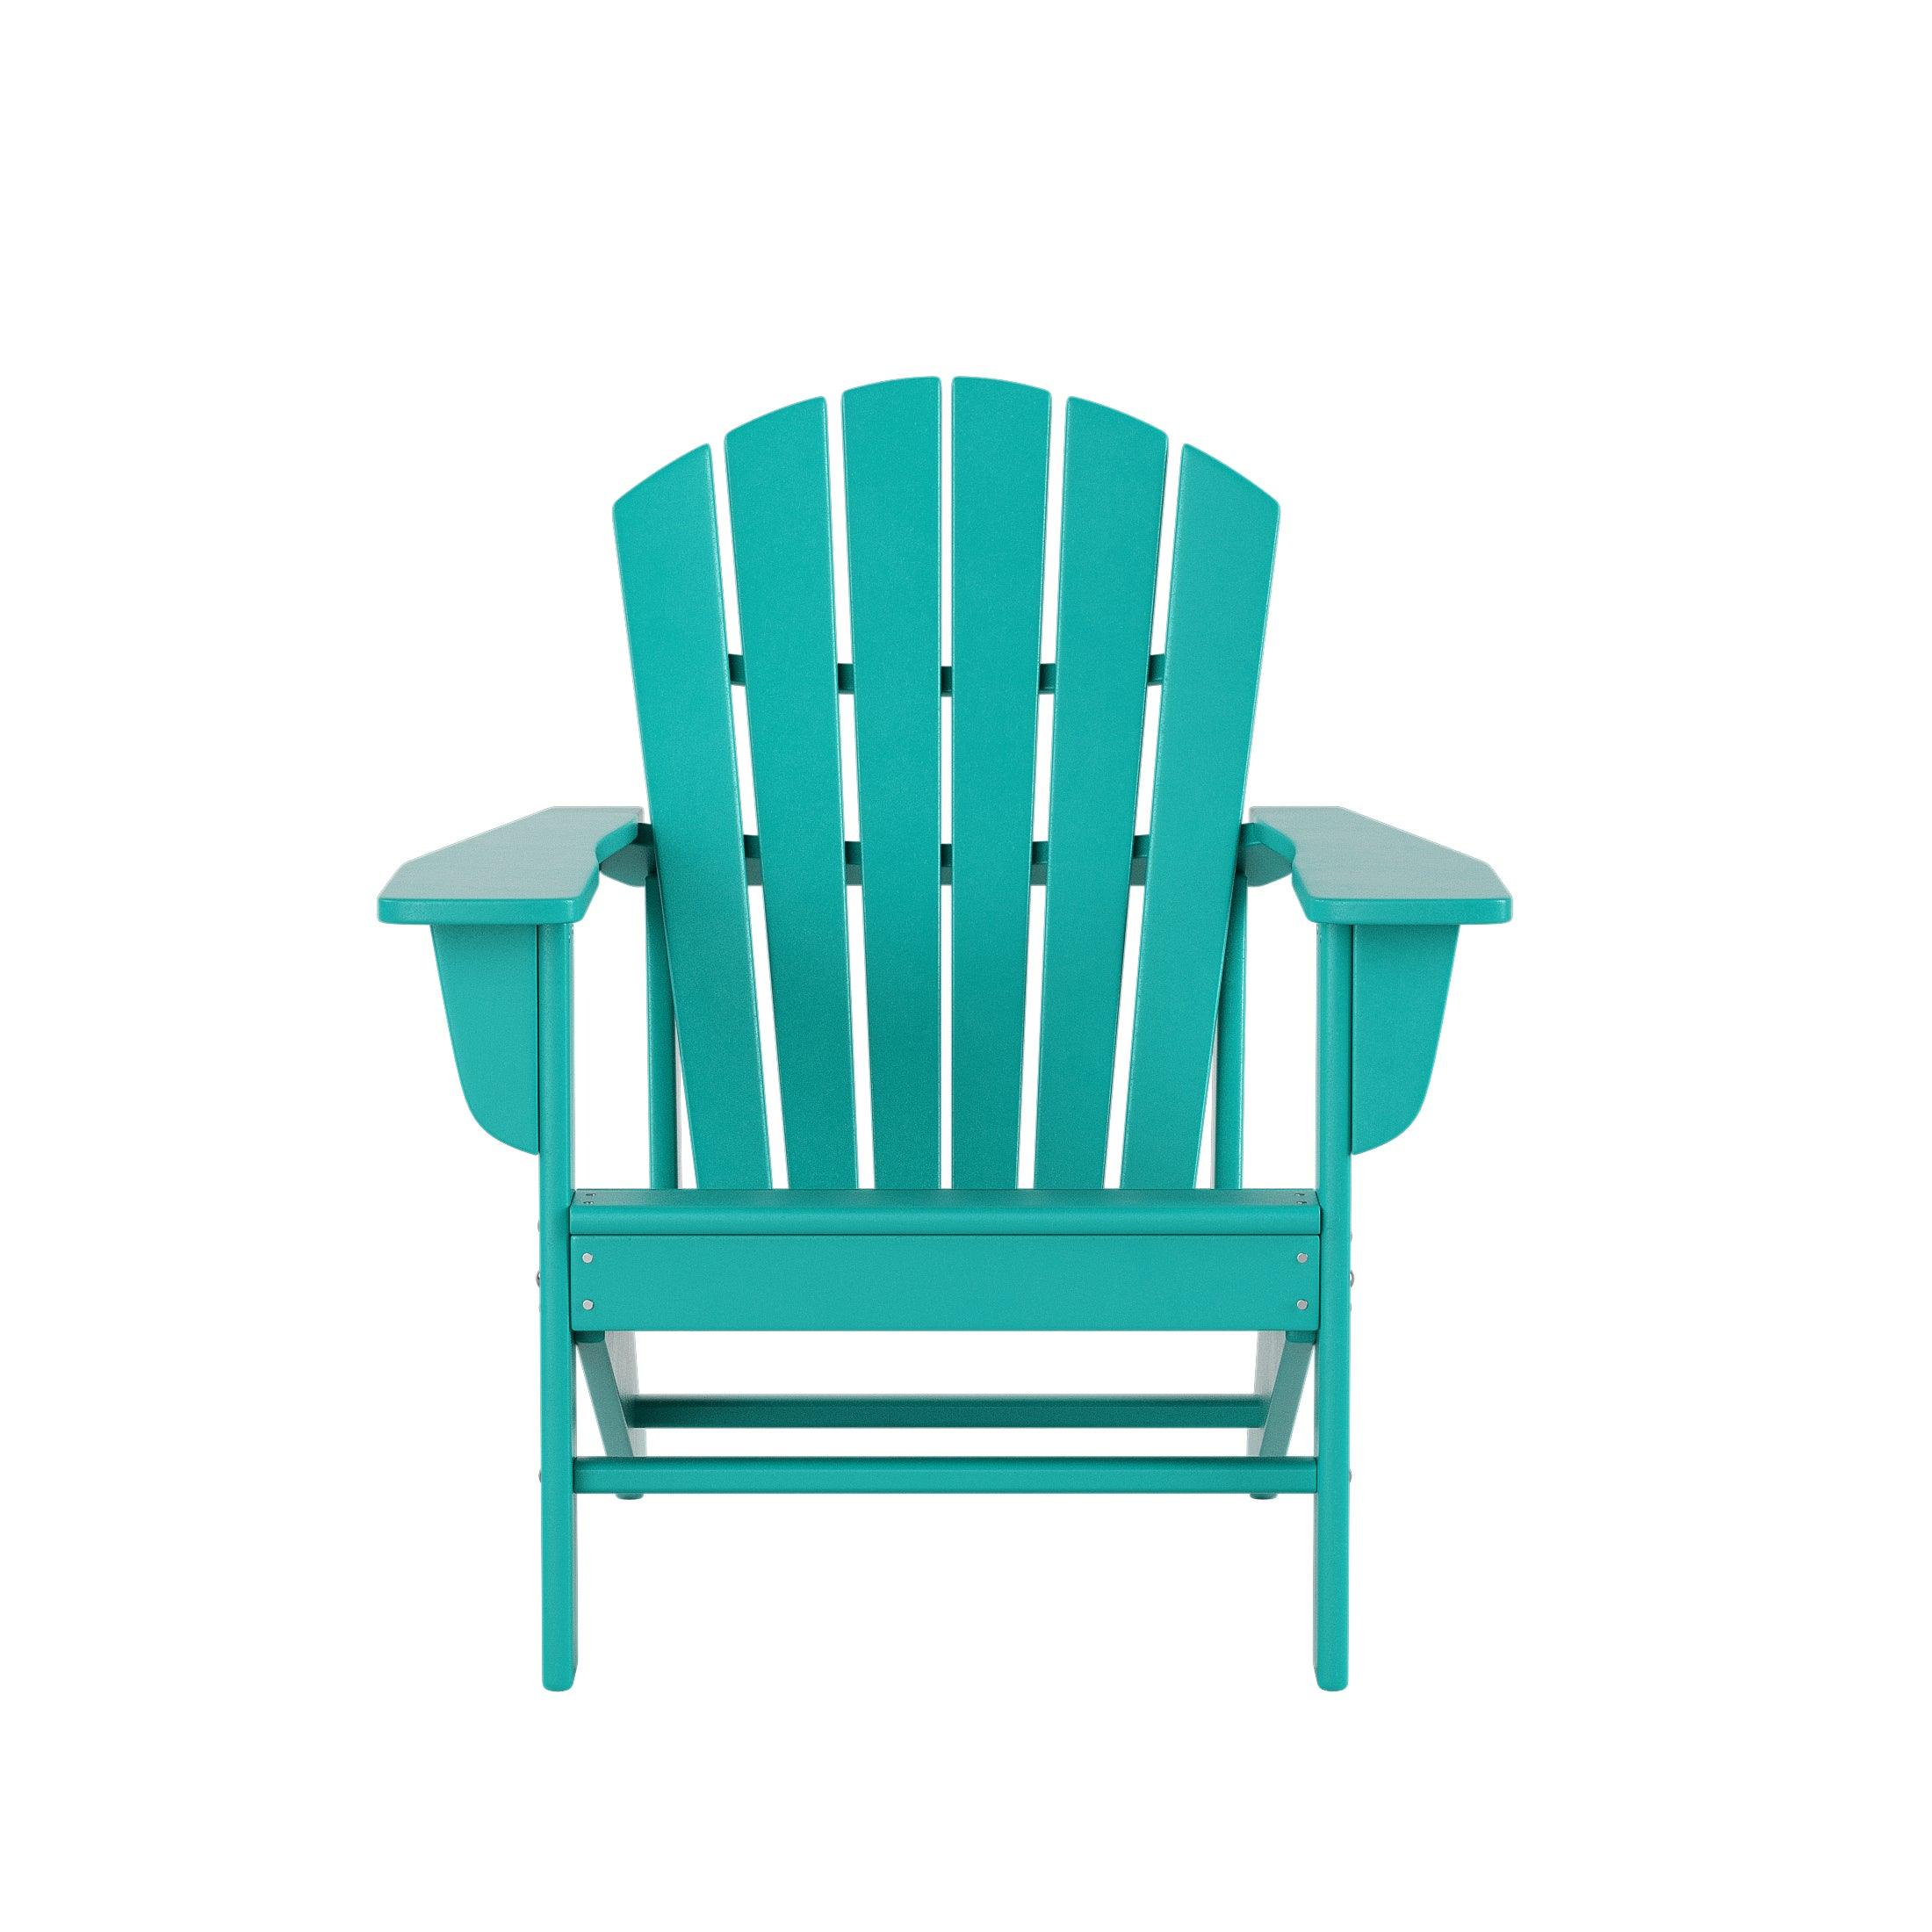 Costaelm Outdoor Adirondack Chair With Ottoman 2-Piece Set, Turquoise